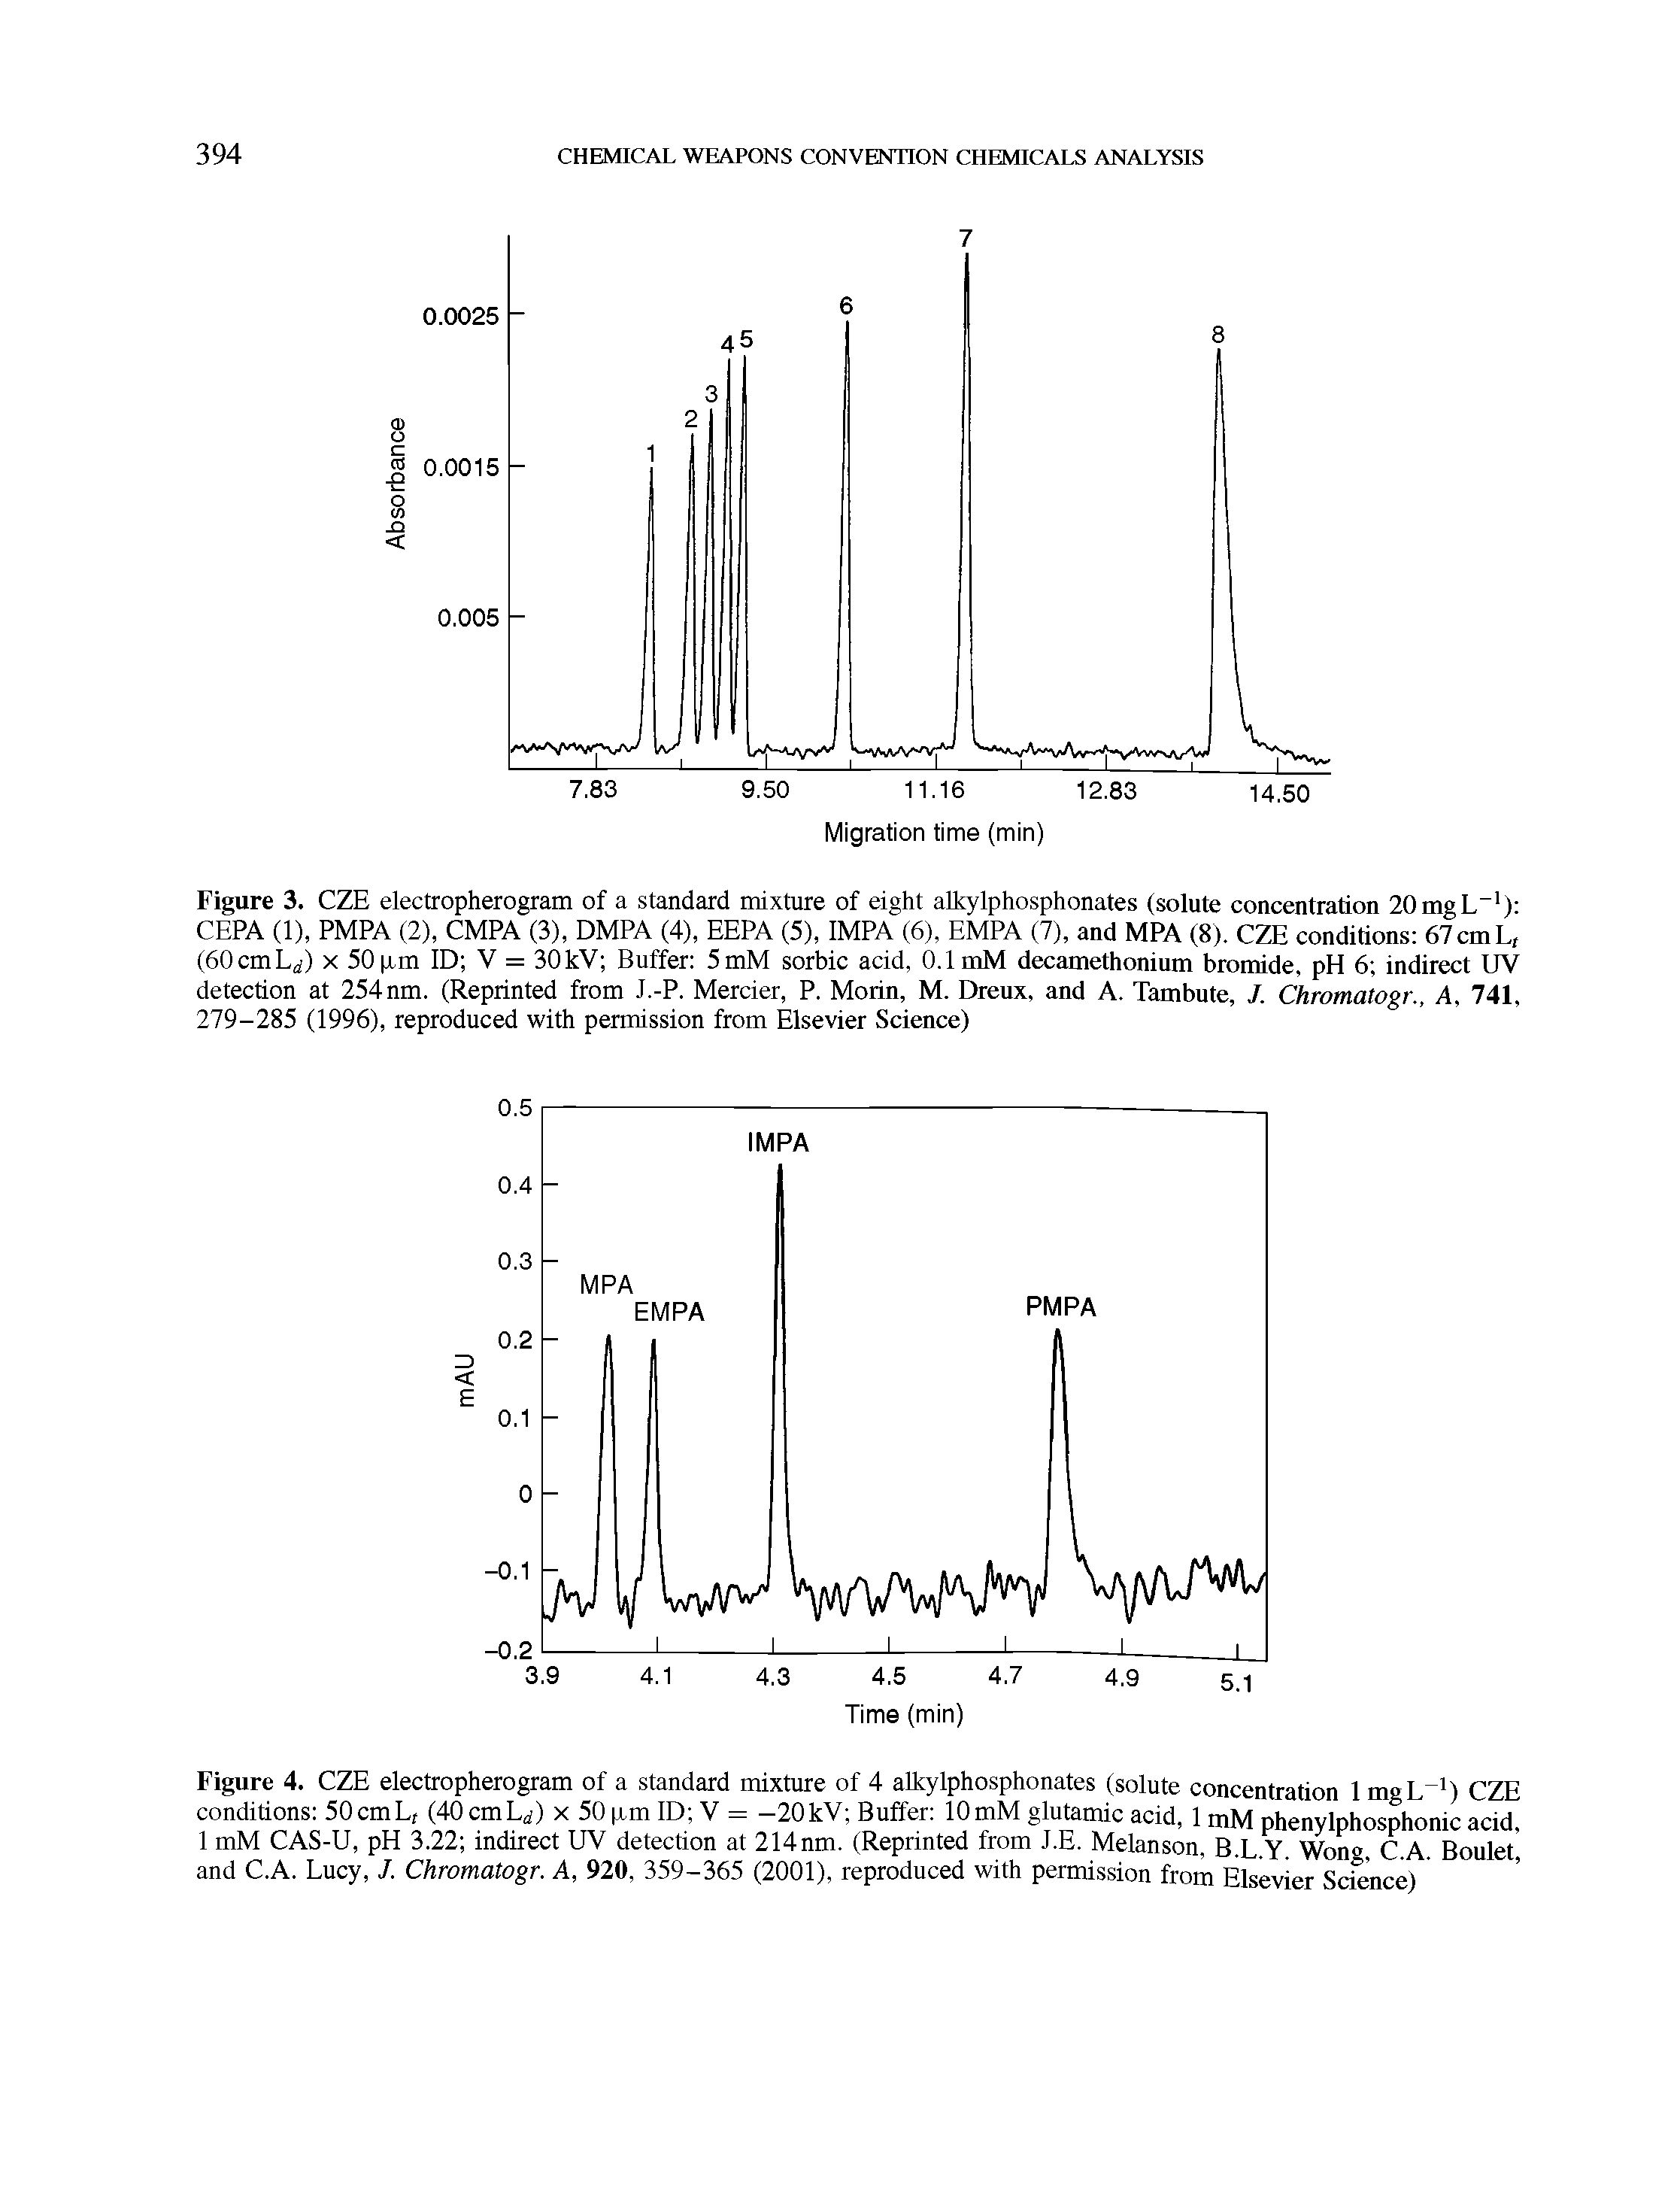 Figure 4. CZE electropherogram of a standard mixture of 4 alkylphosphonates (solute concentration lmgL-1) CZE conditions 50cmLt (40cmLrf) x 50 pm ID V = -20kV Buffer 10 mM glutamic acid, 1 mM phenylphosphonic acid, 1 mM CAS-U, pH 3.22 indirect UV detection at 214nm. (Reprinted from J.E. Melanson, B.L.Y. Wong, C.A. Bouleti and C.A. Lucy, J. Chromatogr. A, 920, 359-365 (2001), reproduced with permission from Elsevier Science)...